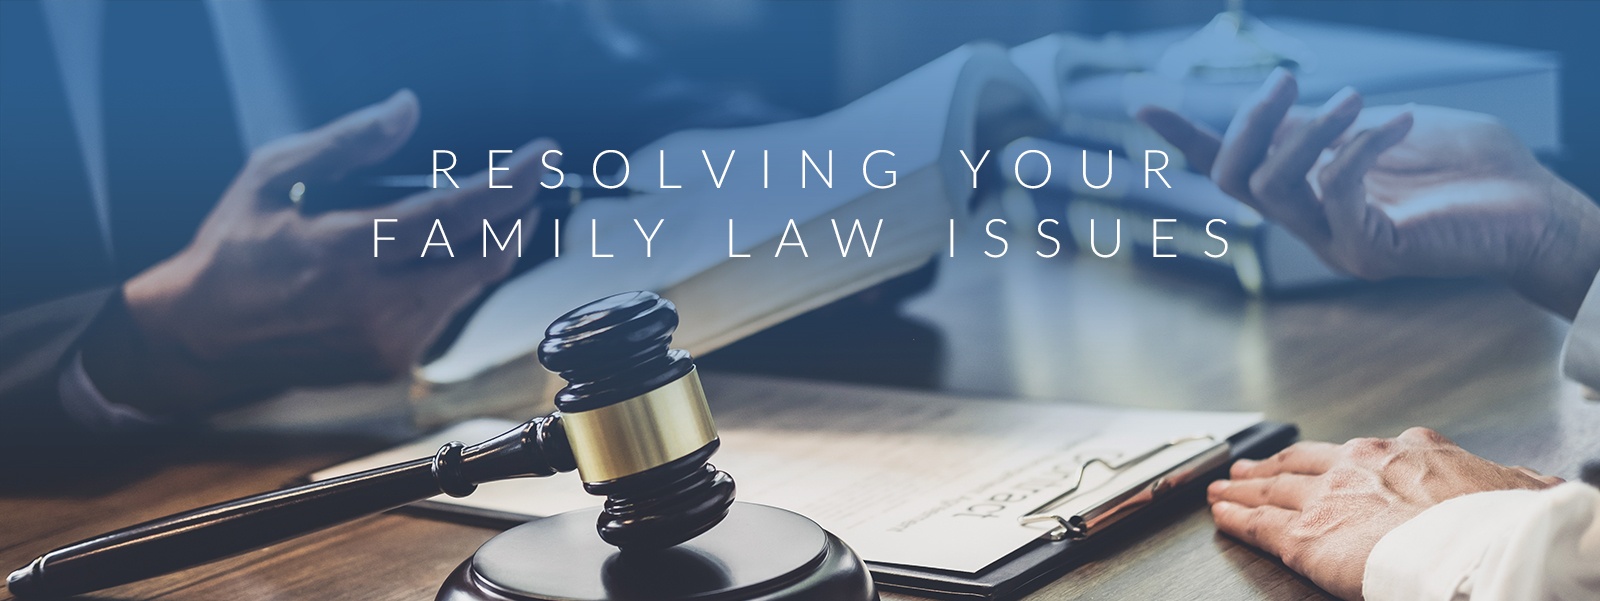 Resolving Your Family Law Issues